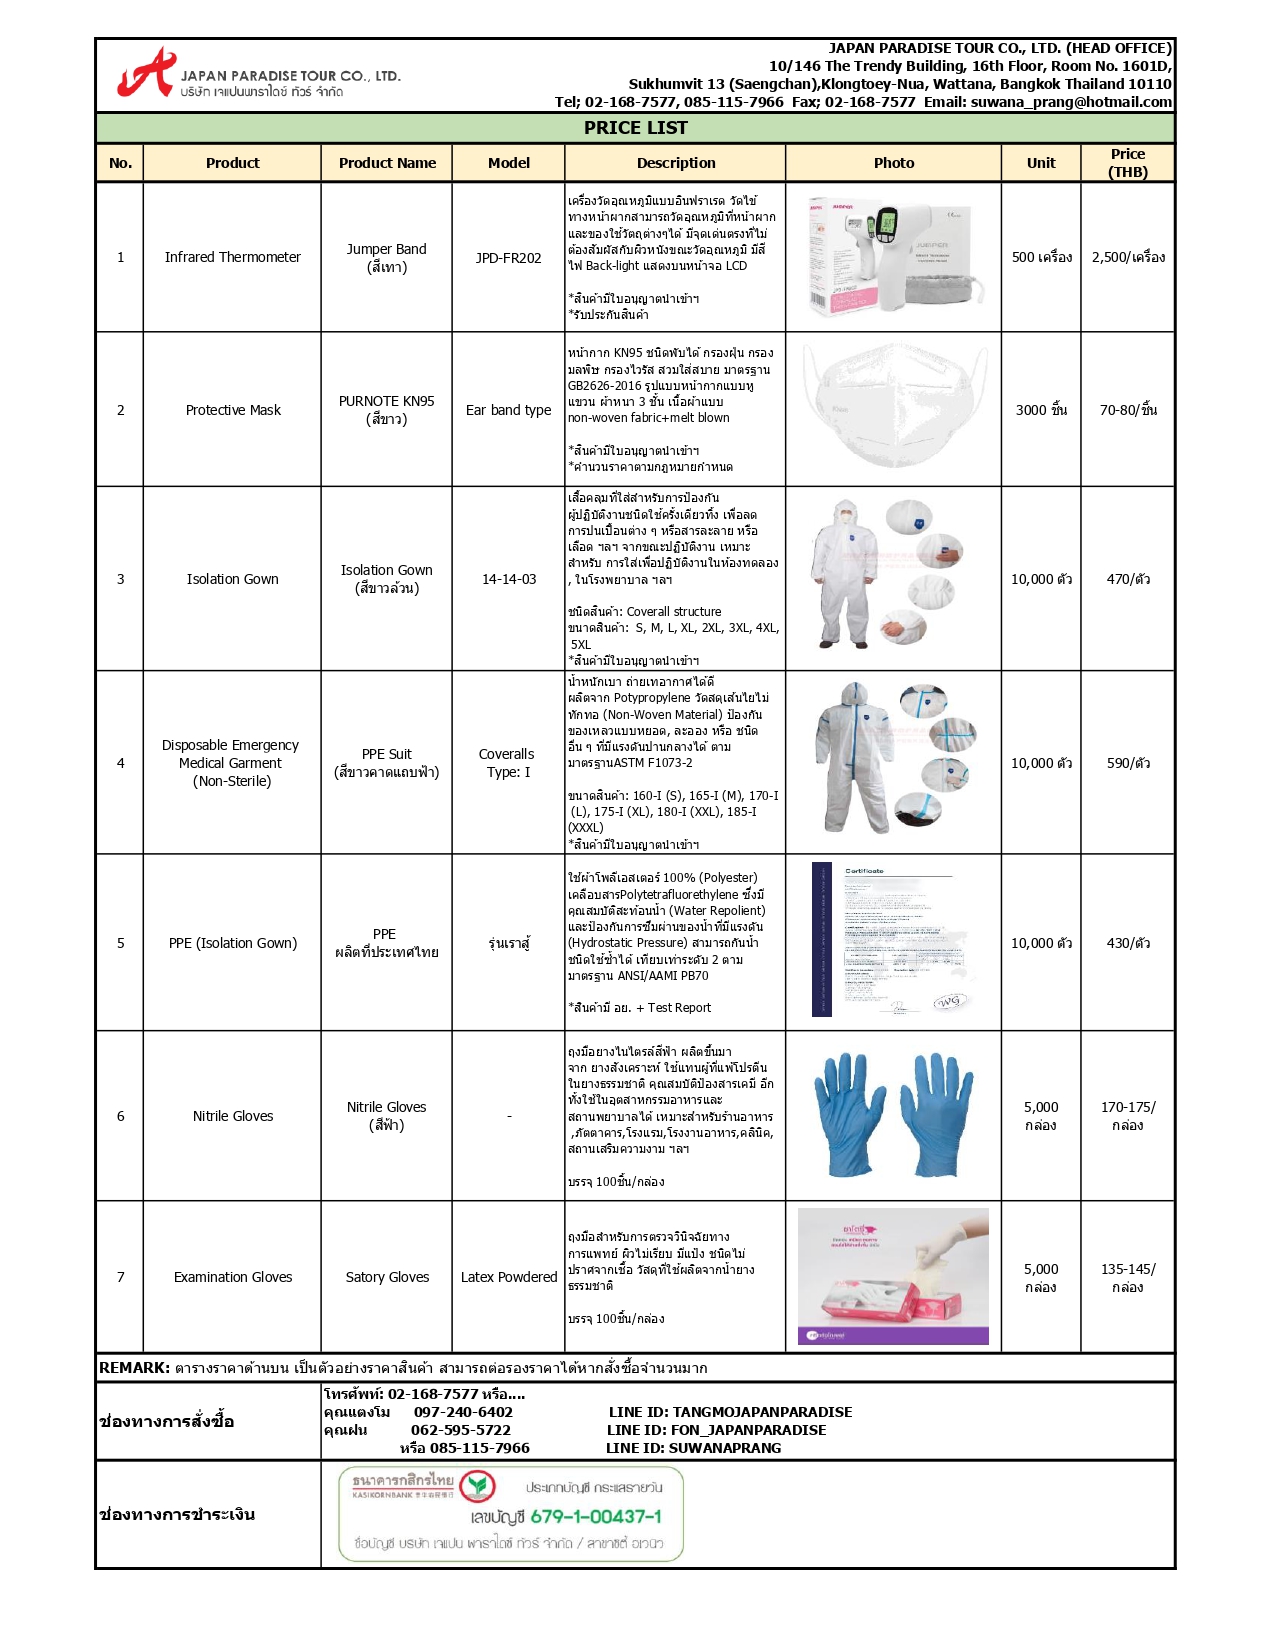 Price List Medical Product page 0001